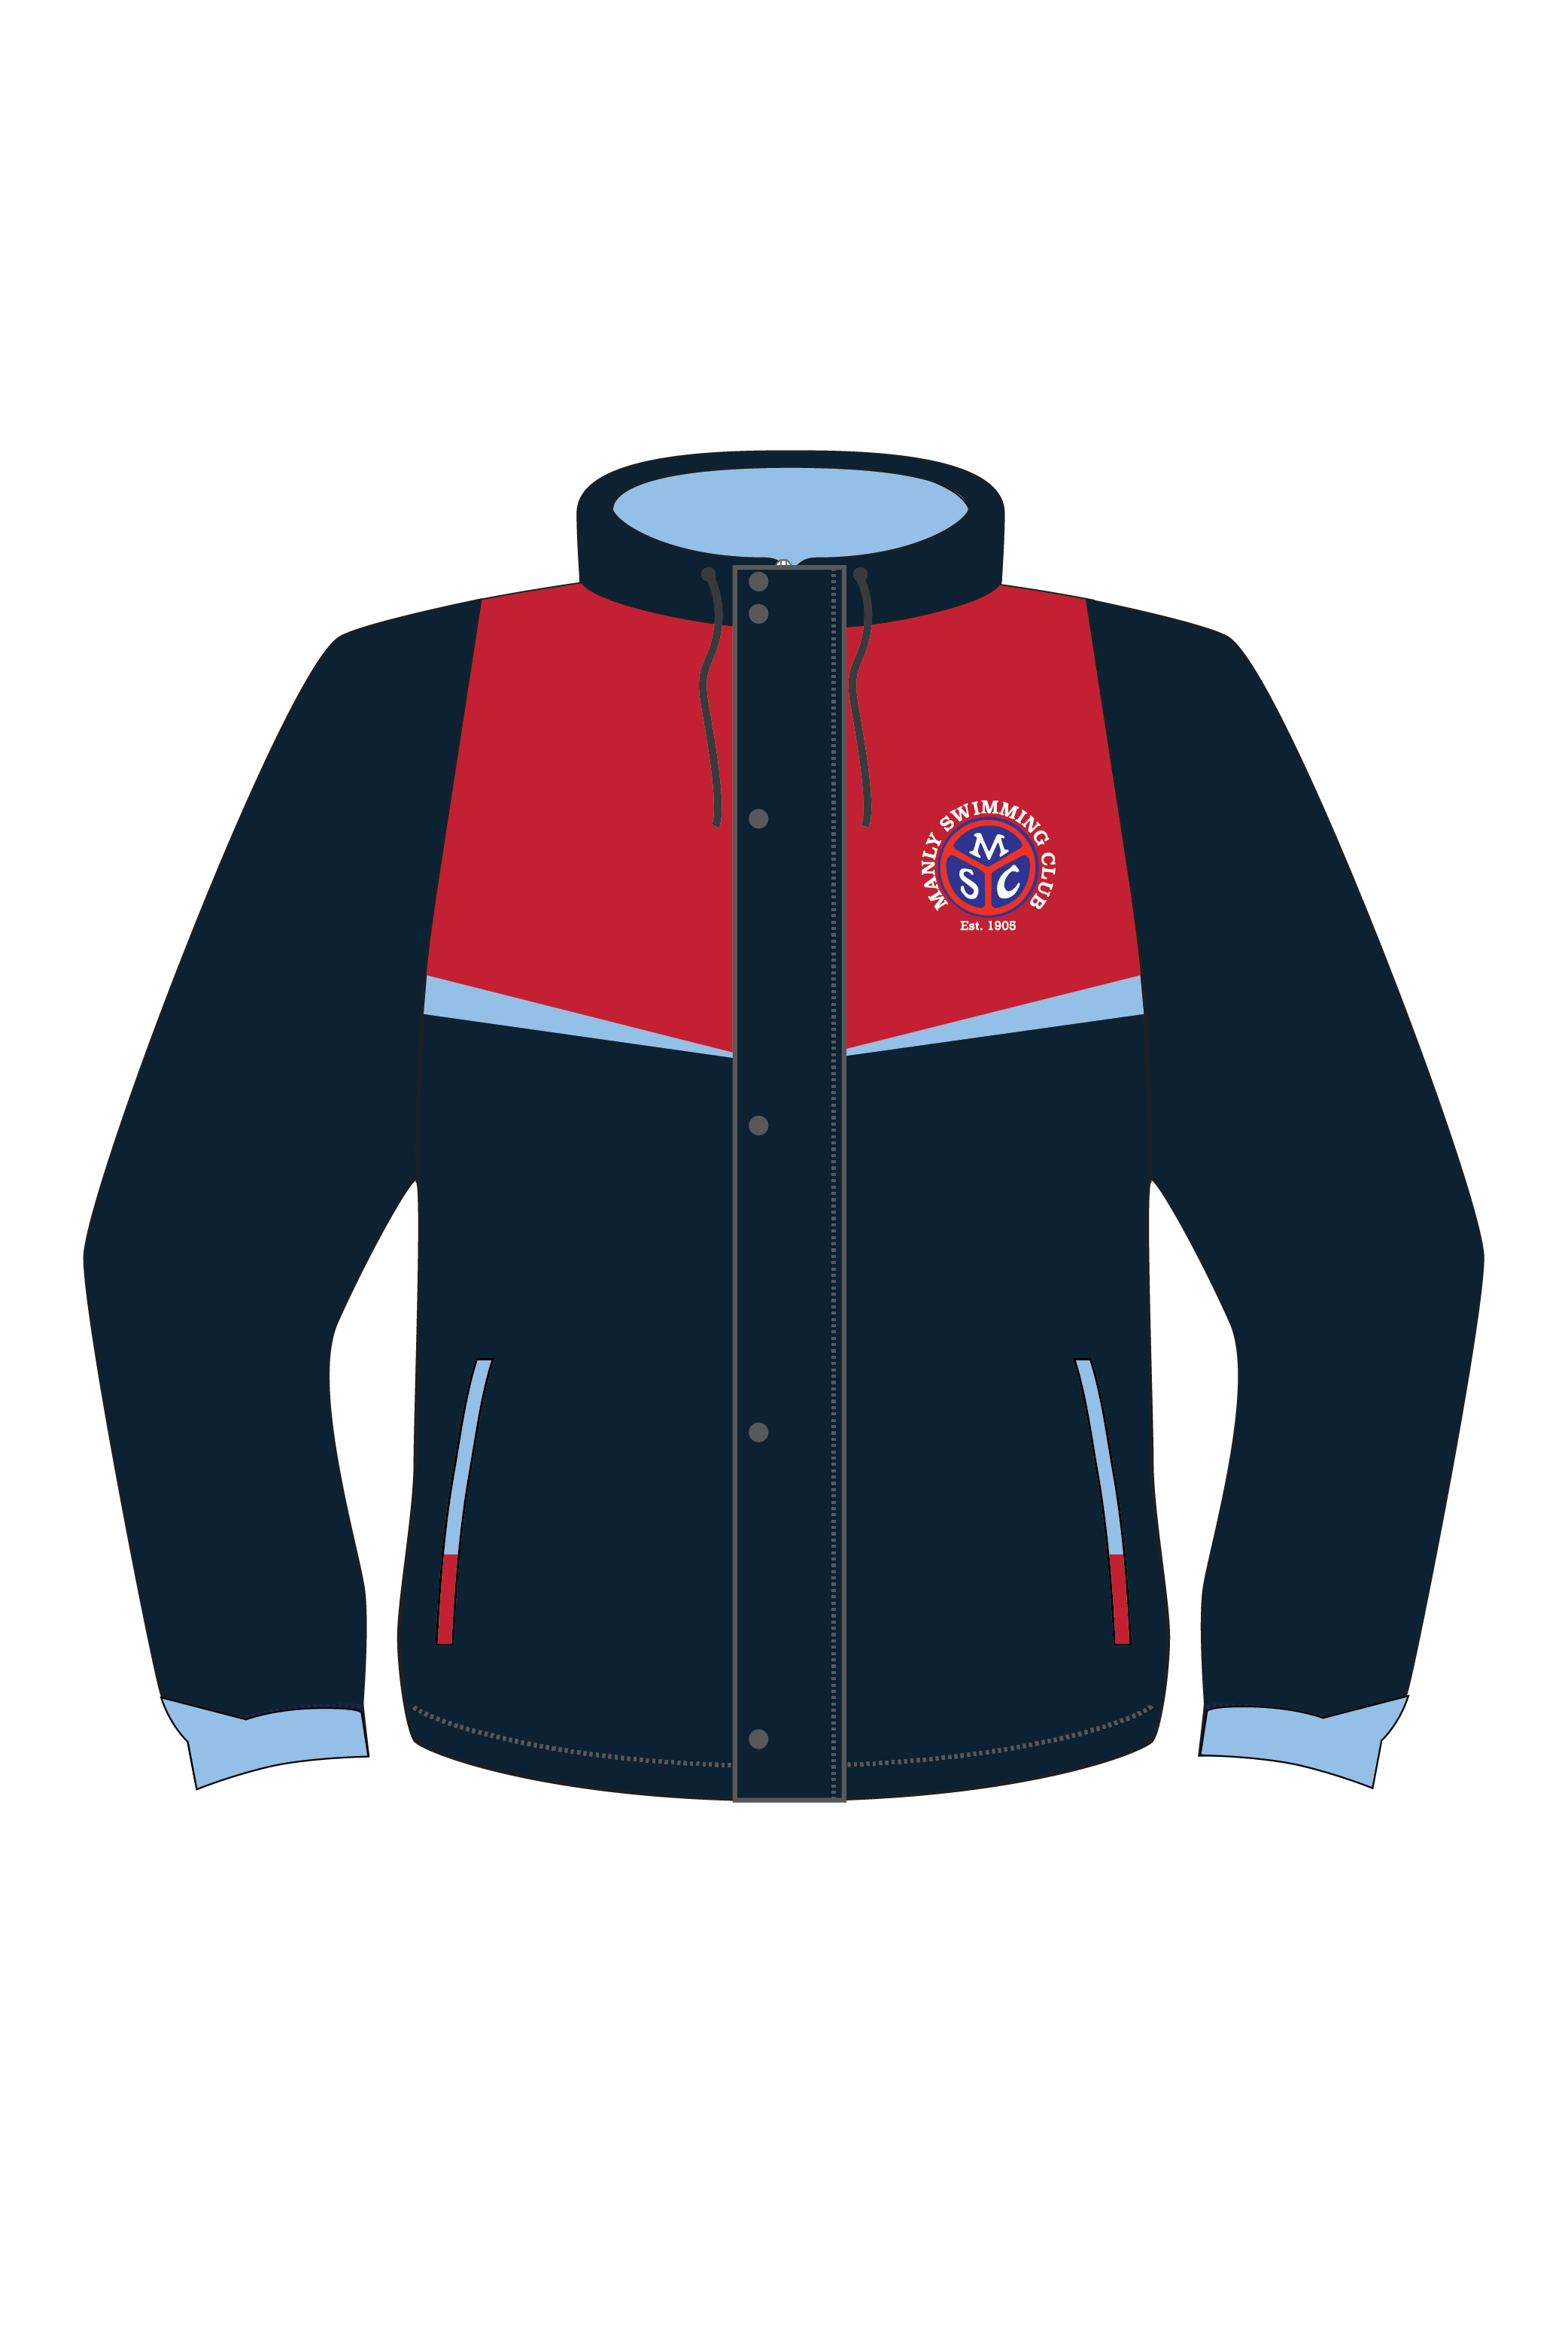 Manly Swimming Club Sports Jacket